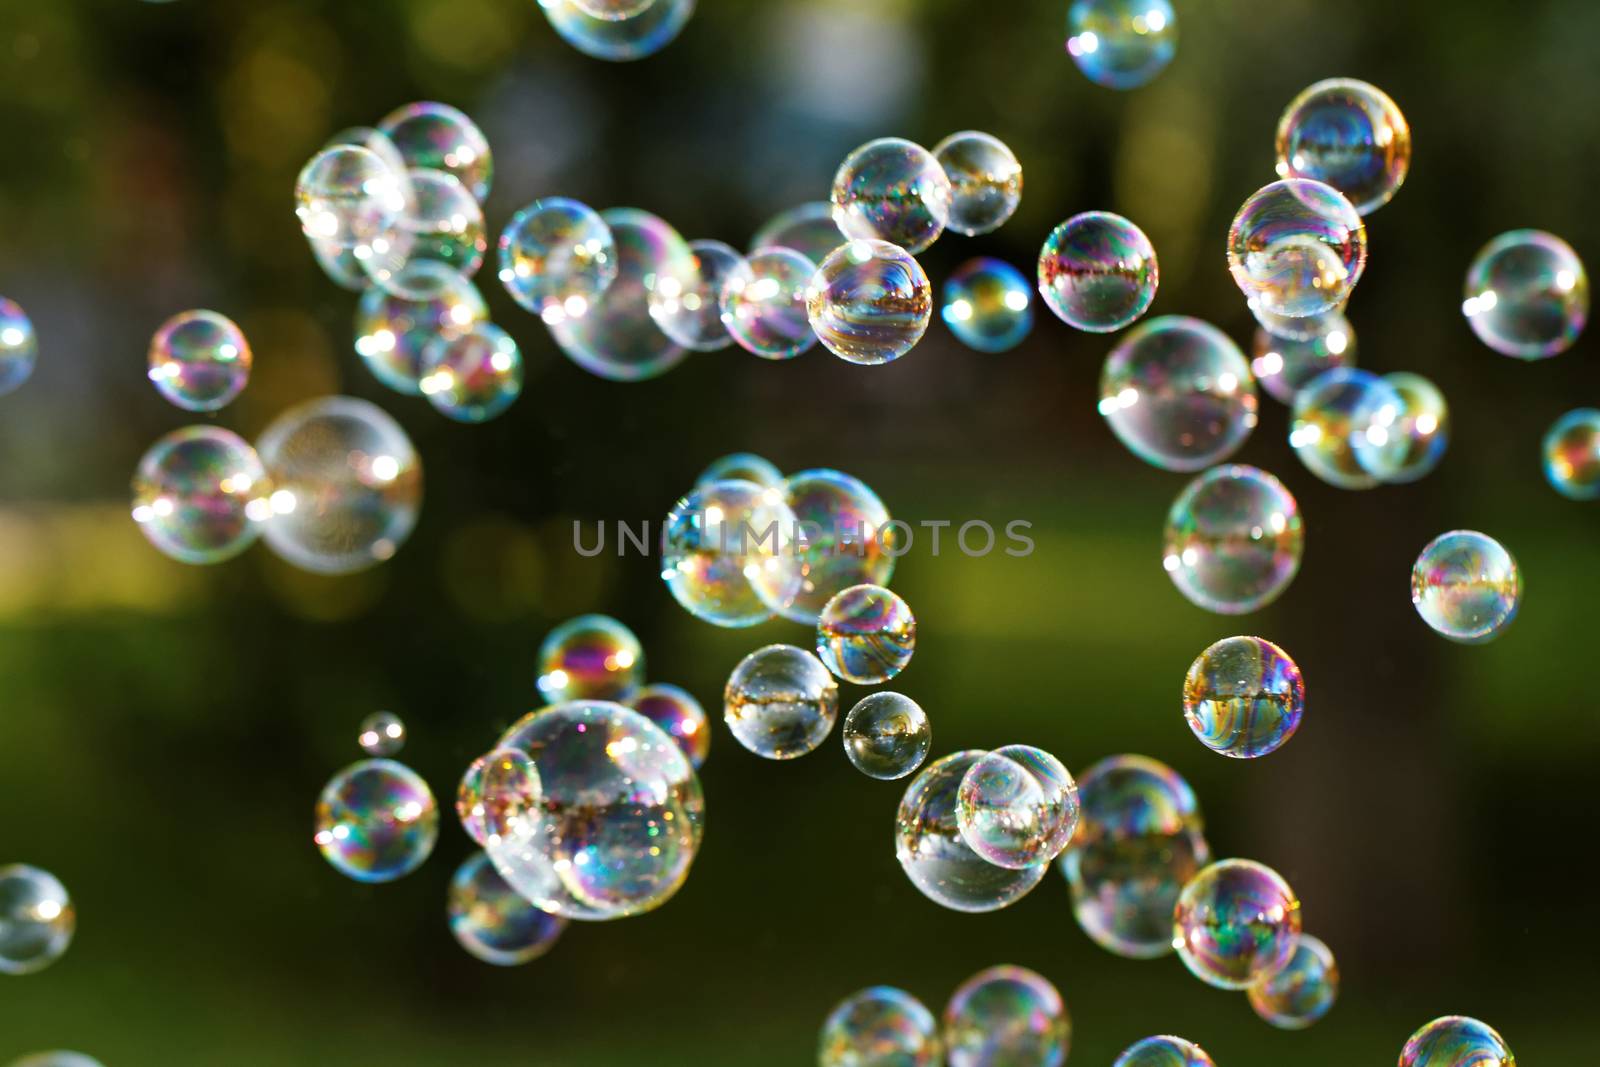 Soap bubbles by Nneirda